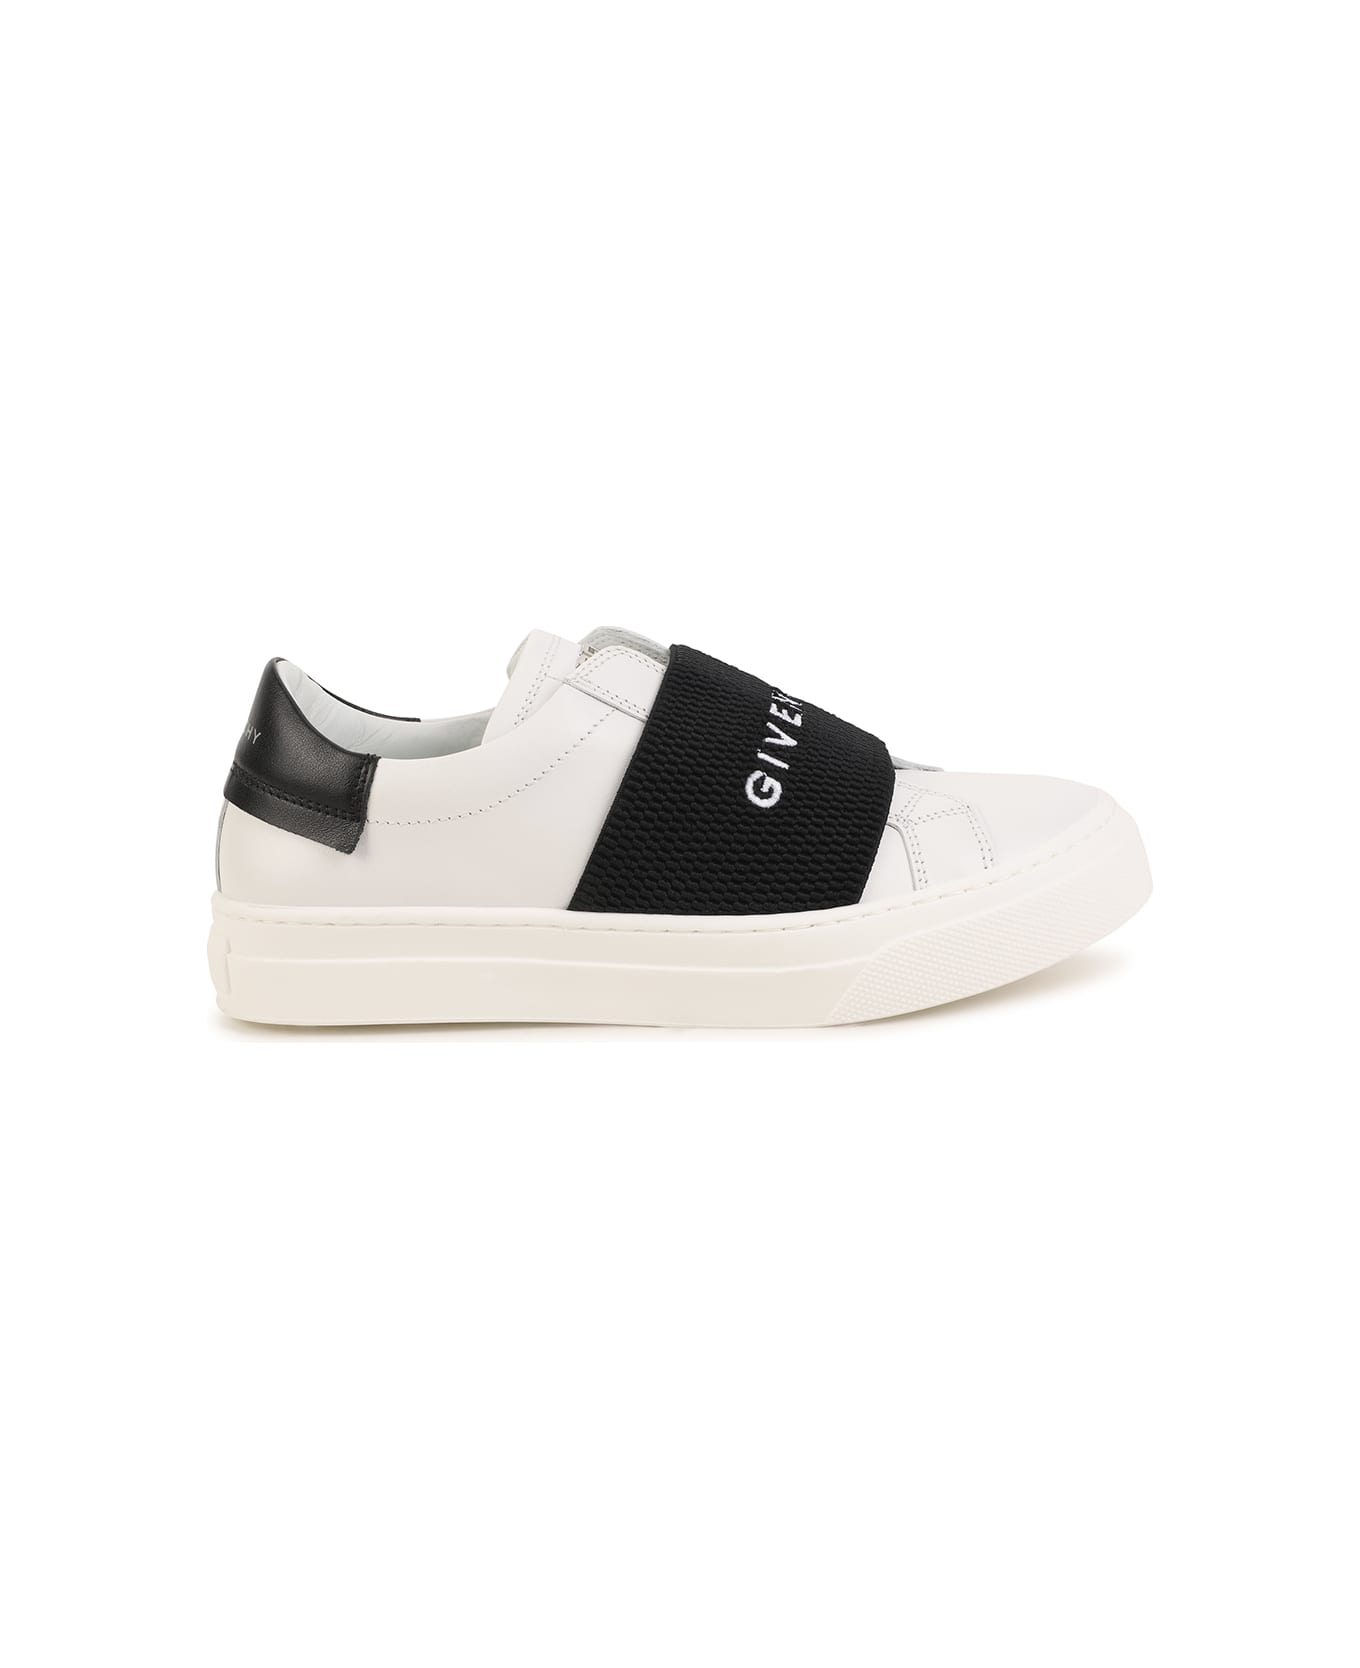 Givenchy White Urban Street Sneakers With Black Logo Band - Bianco